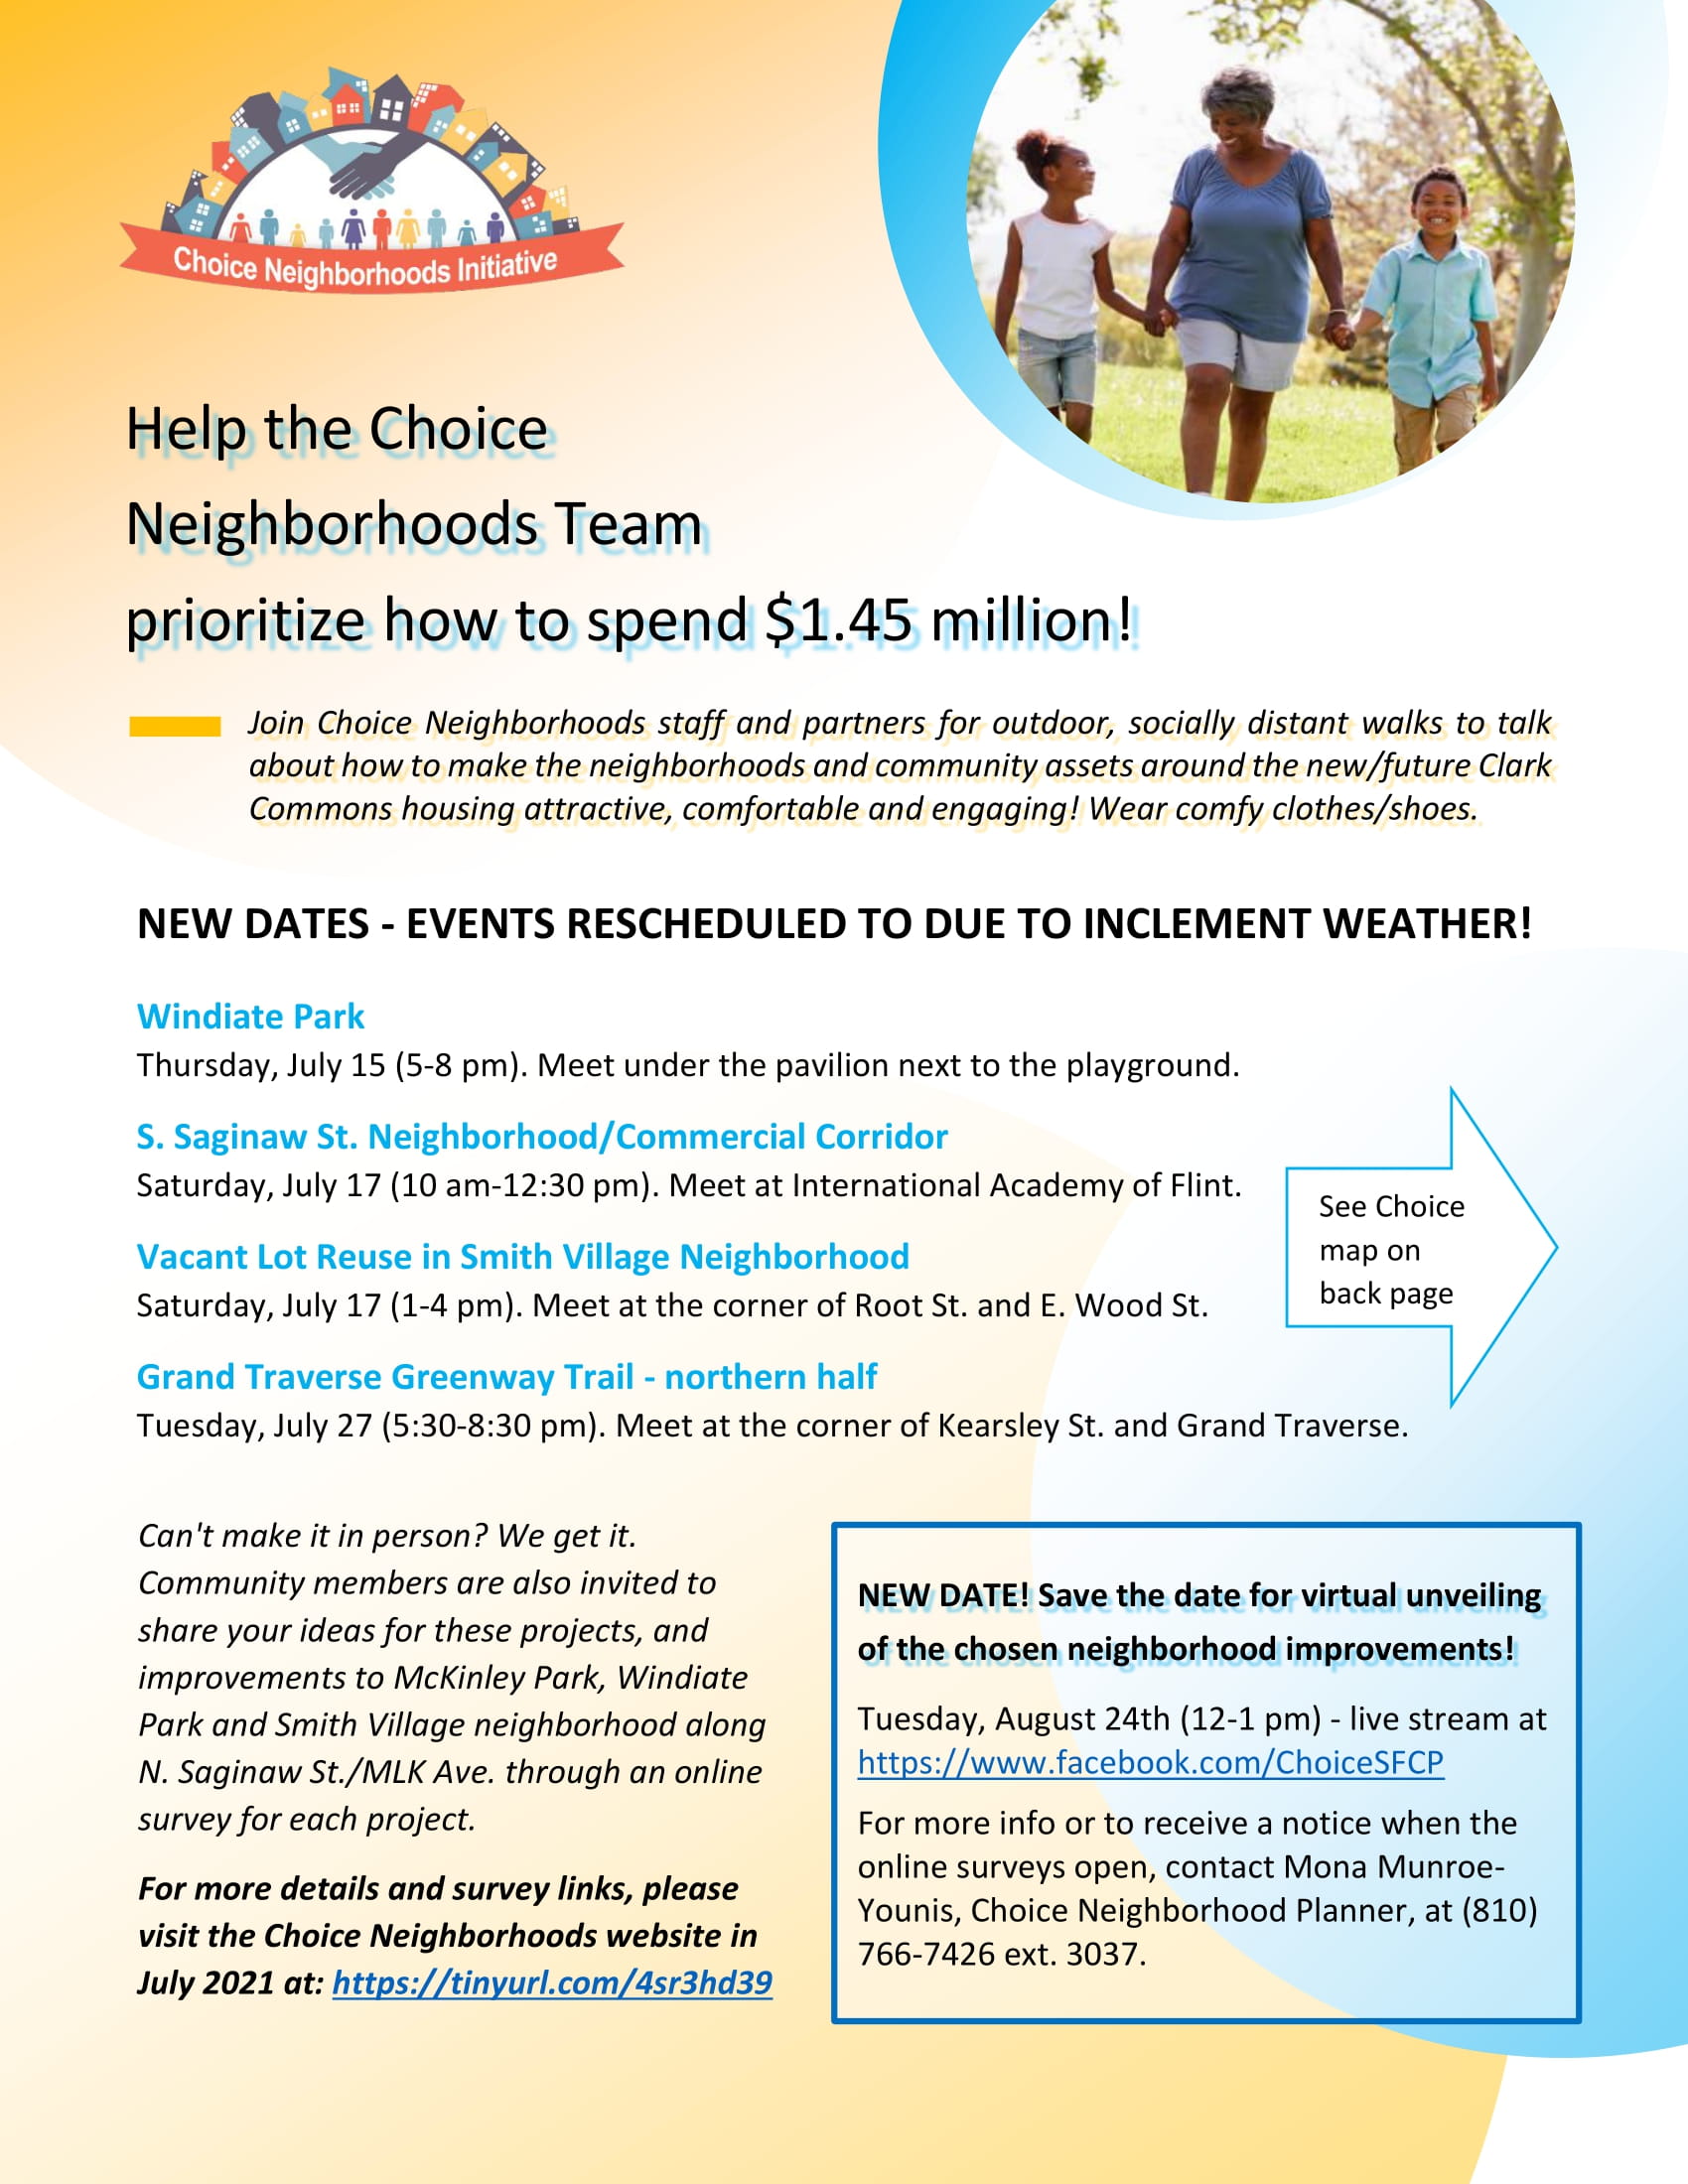 Join Community Conversations to Help The Choice Team Spend $1.45 million